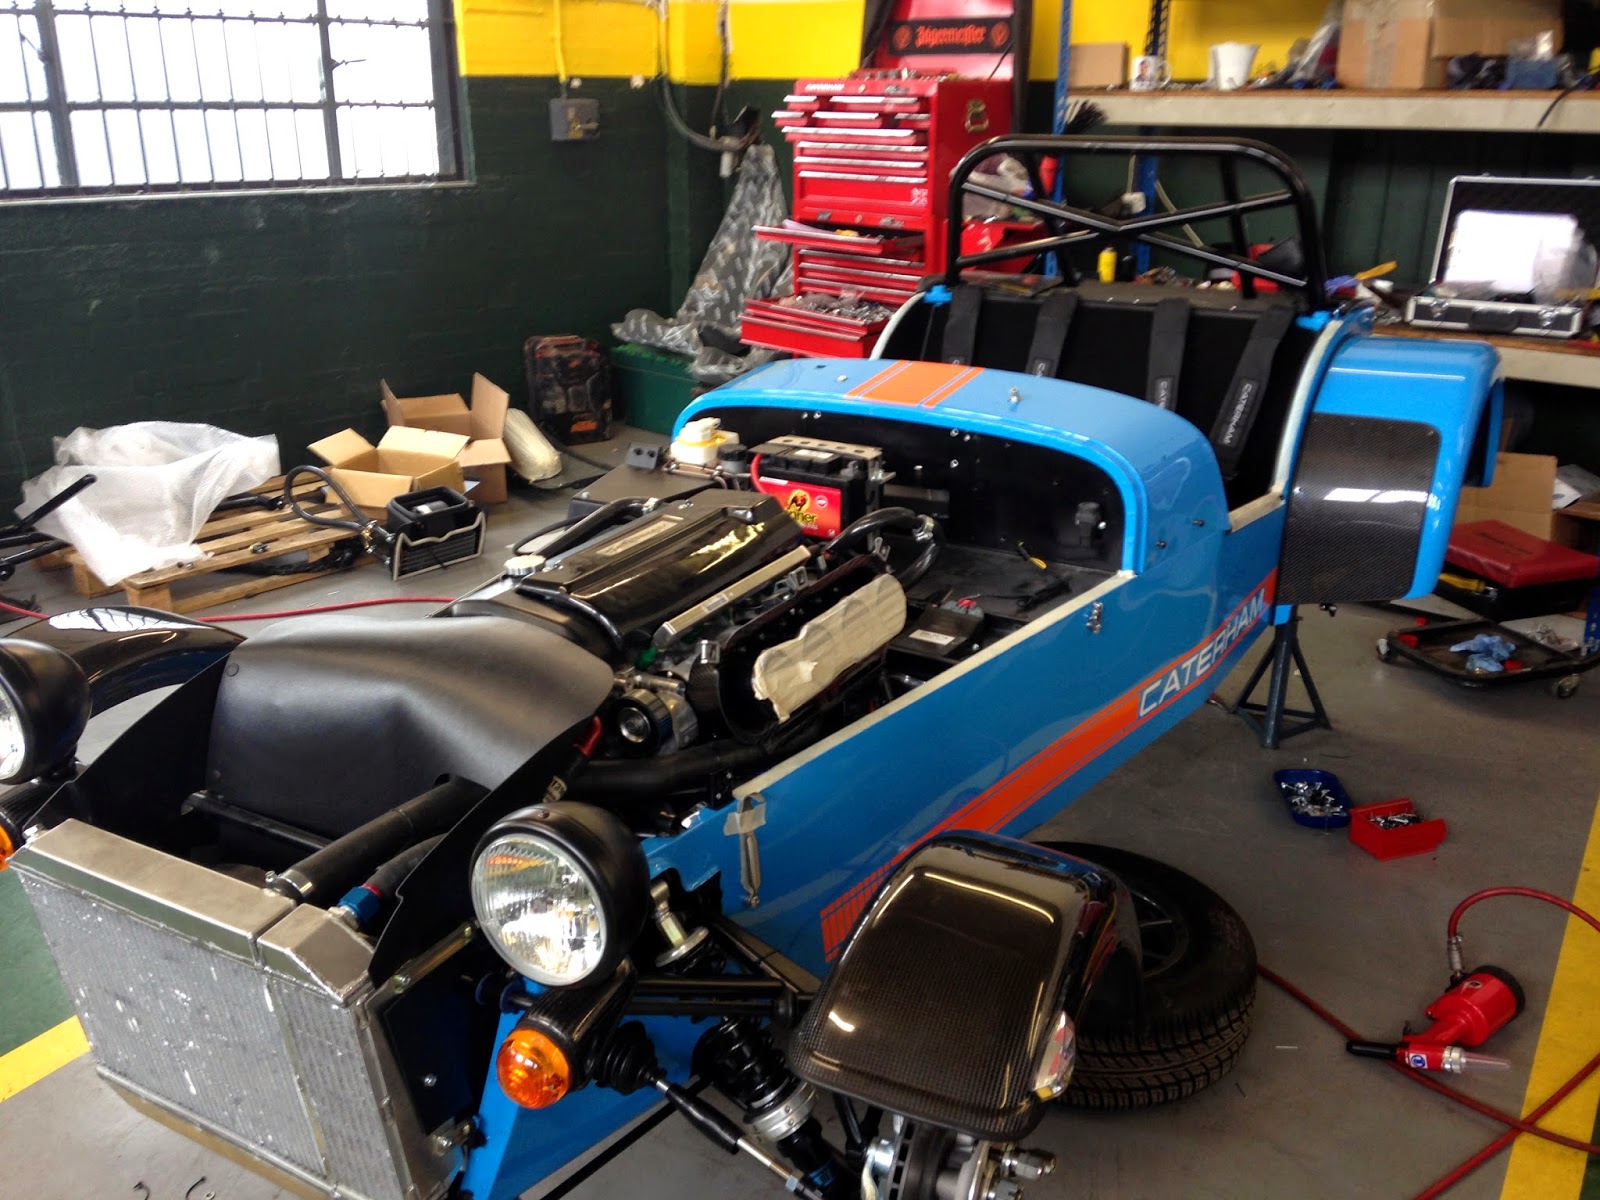 Caterham R500 nearing it's second completion